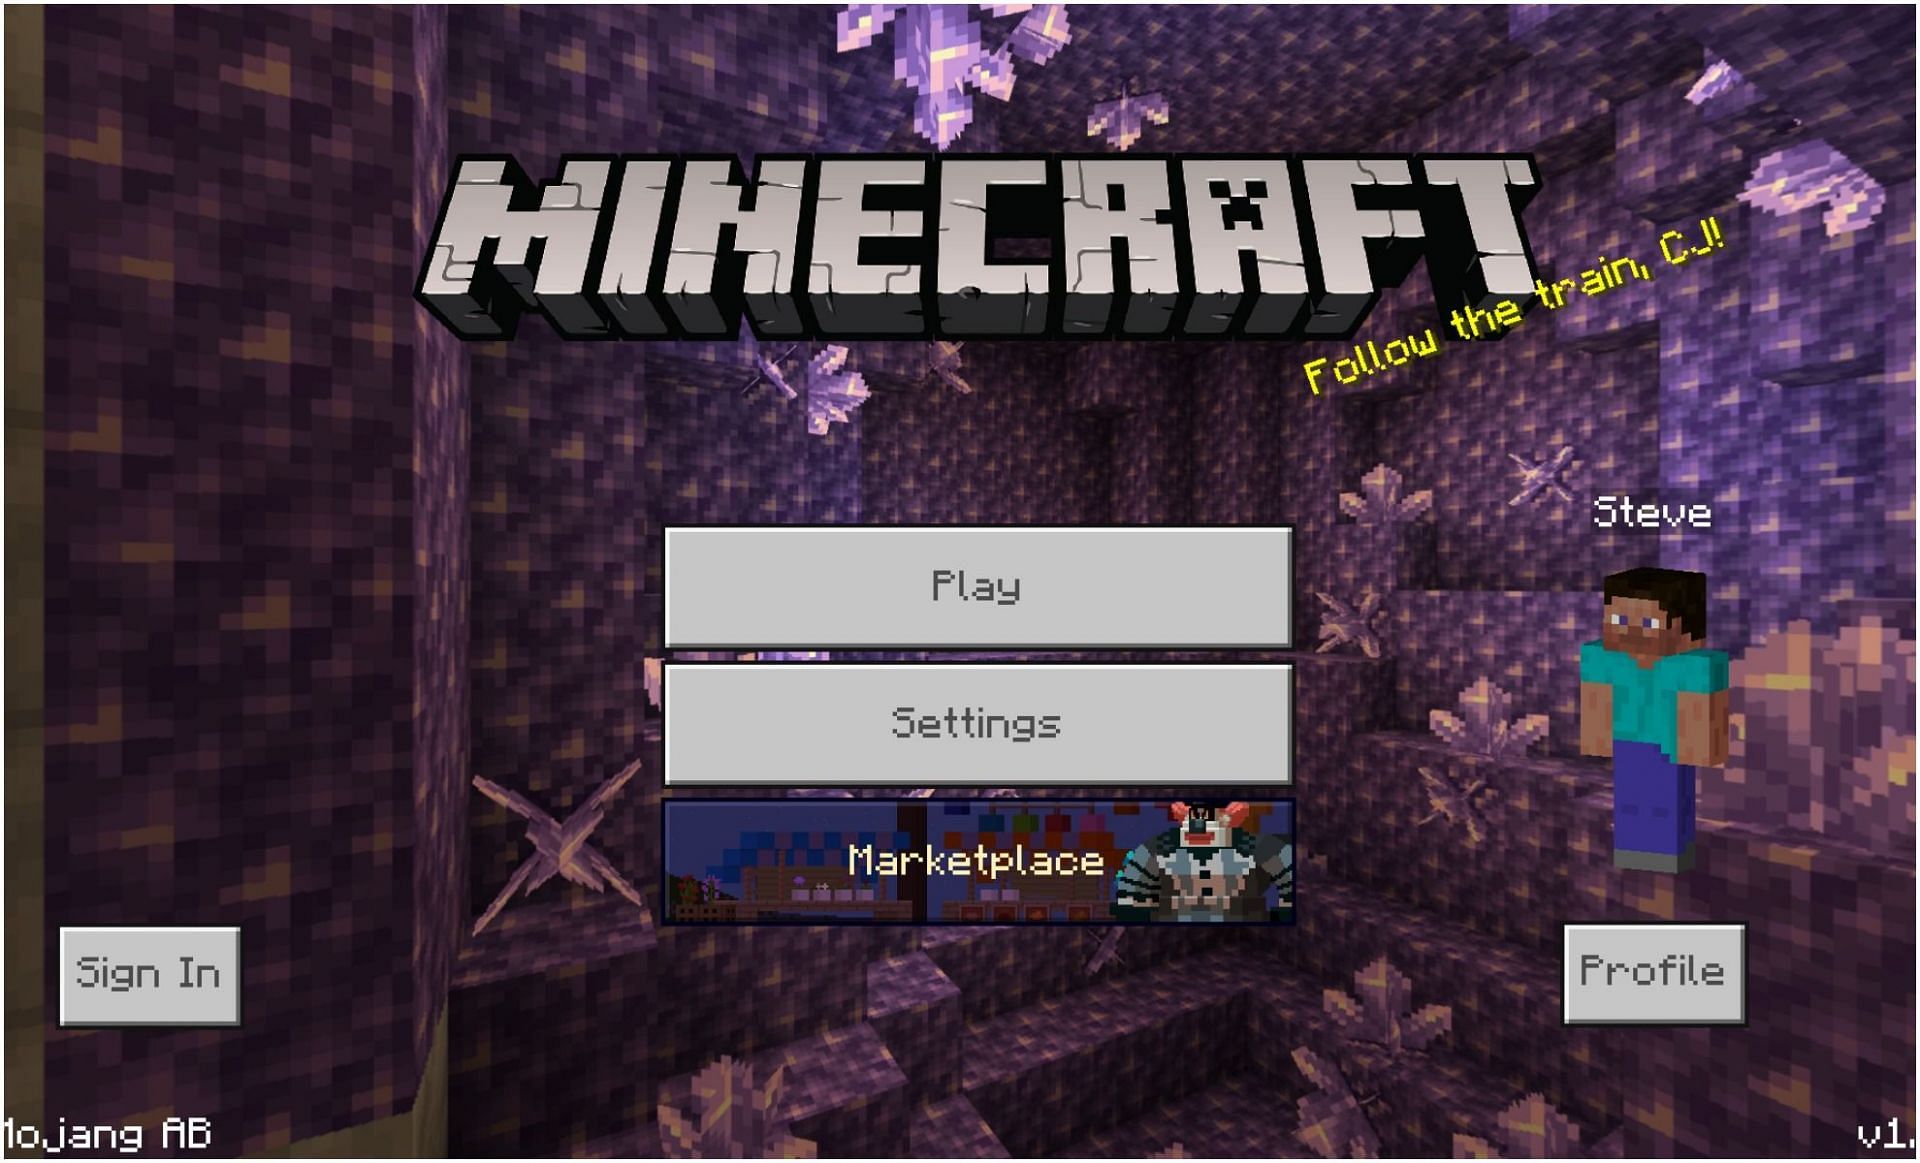 Bedrock Edition is comprised of Minecraft on different platforms (Image via Minecraft)